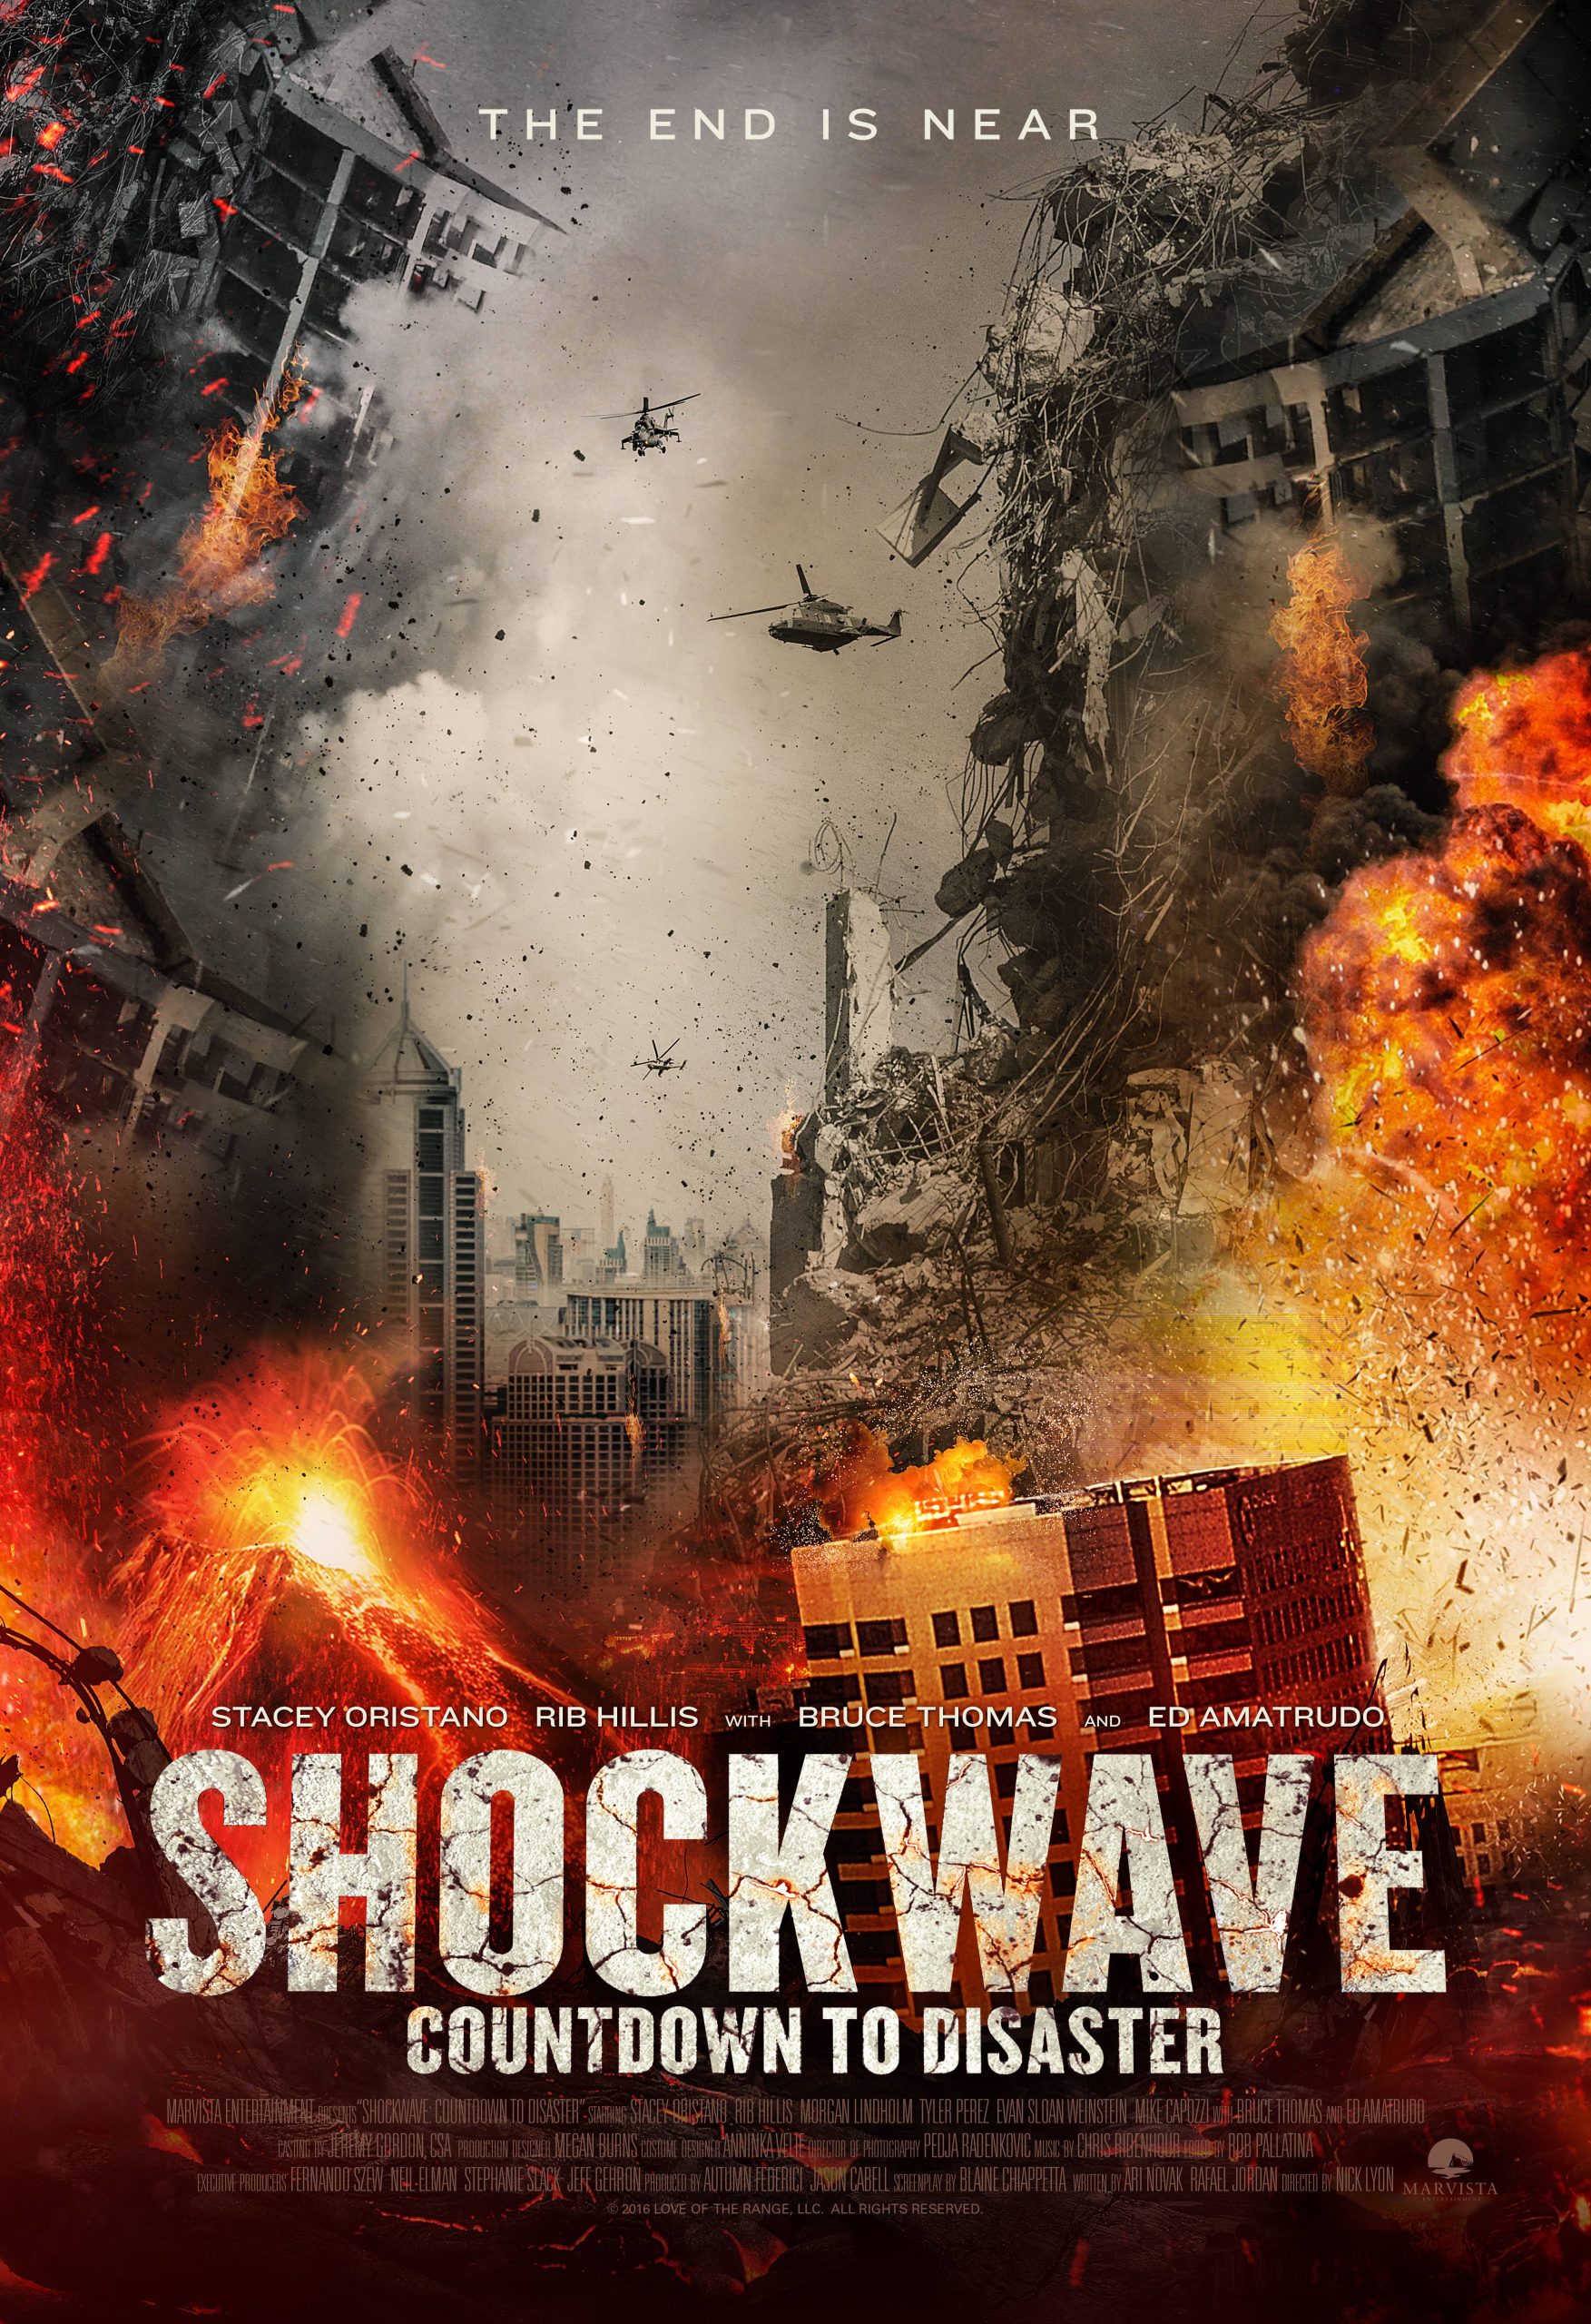 Shockwave: Countdown to Disaster (2017) Stacey Oristano